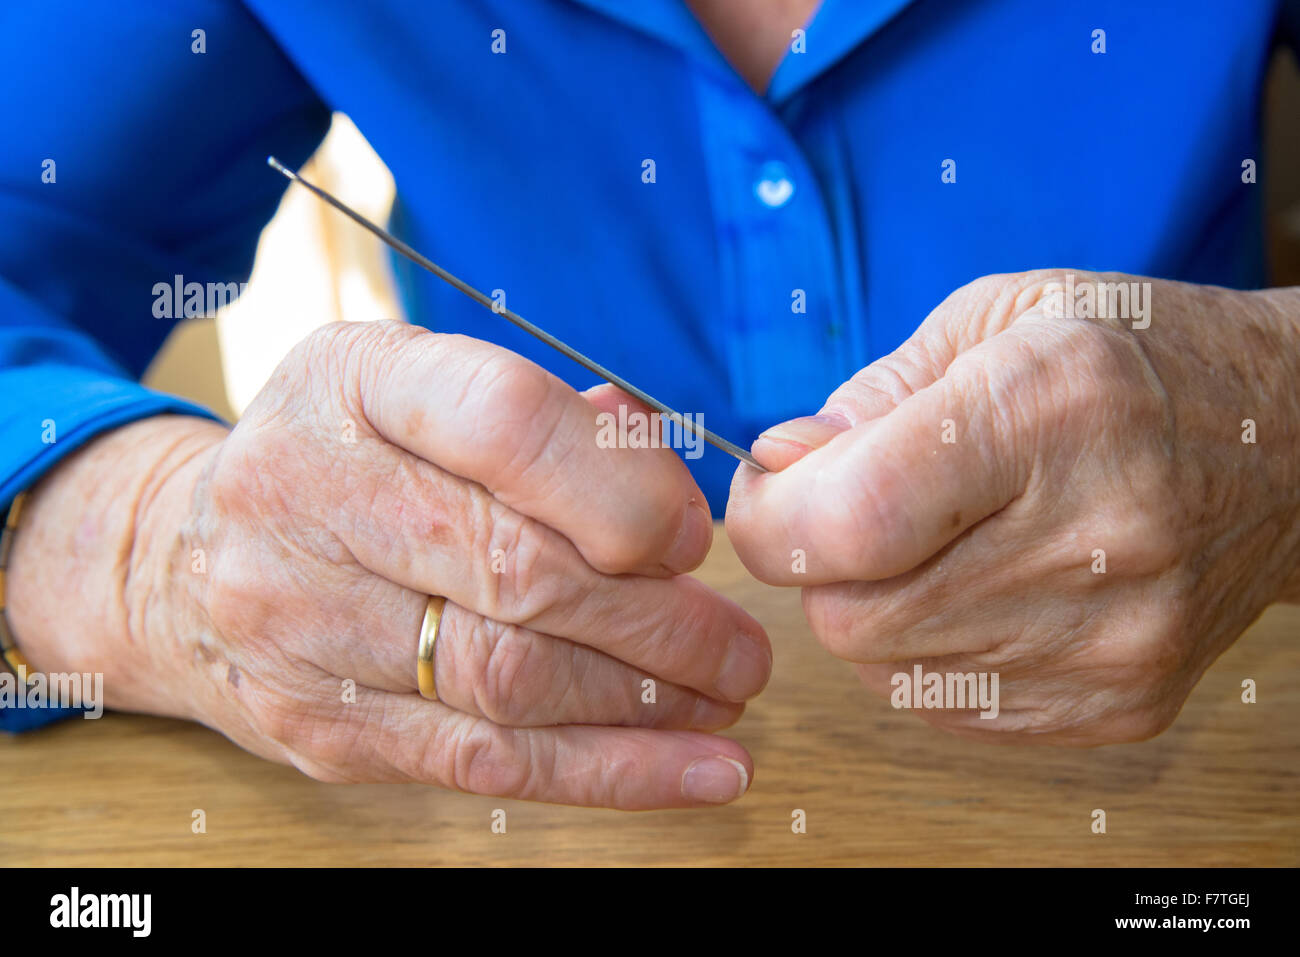 hands of old woman polishing nails Stock Photo